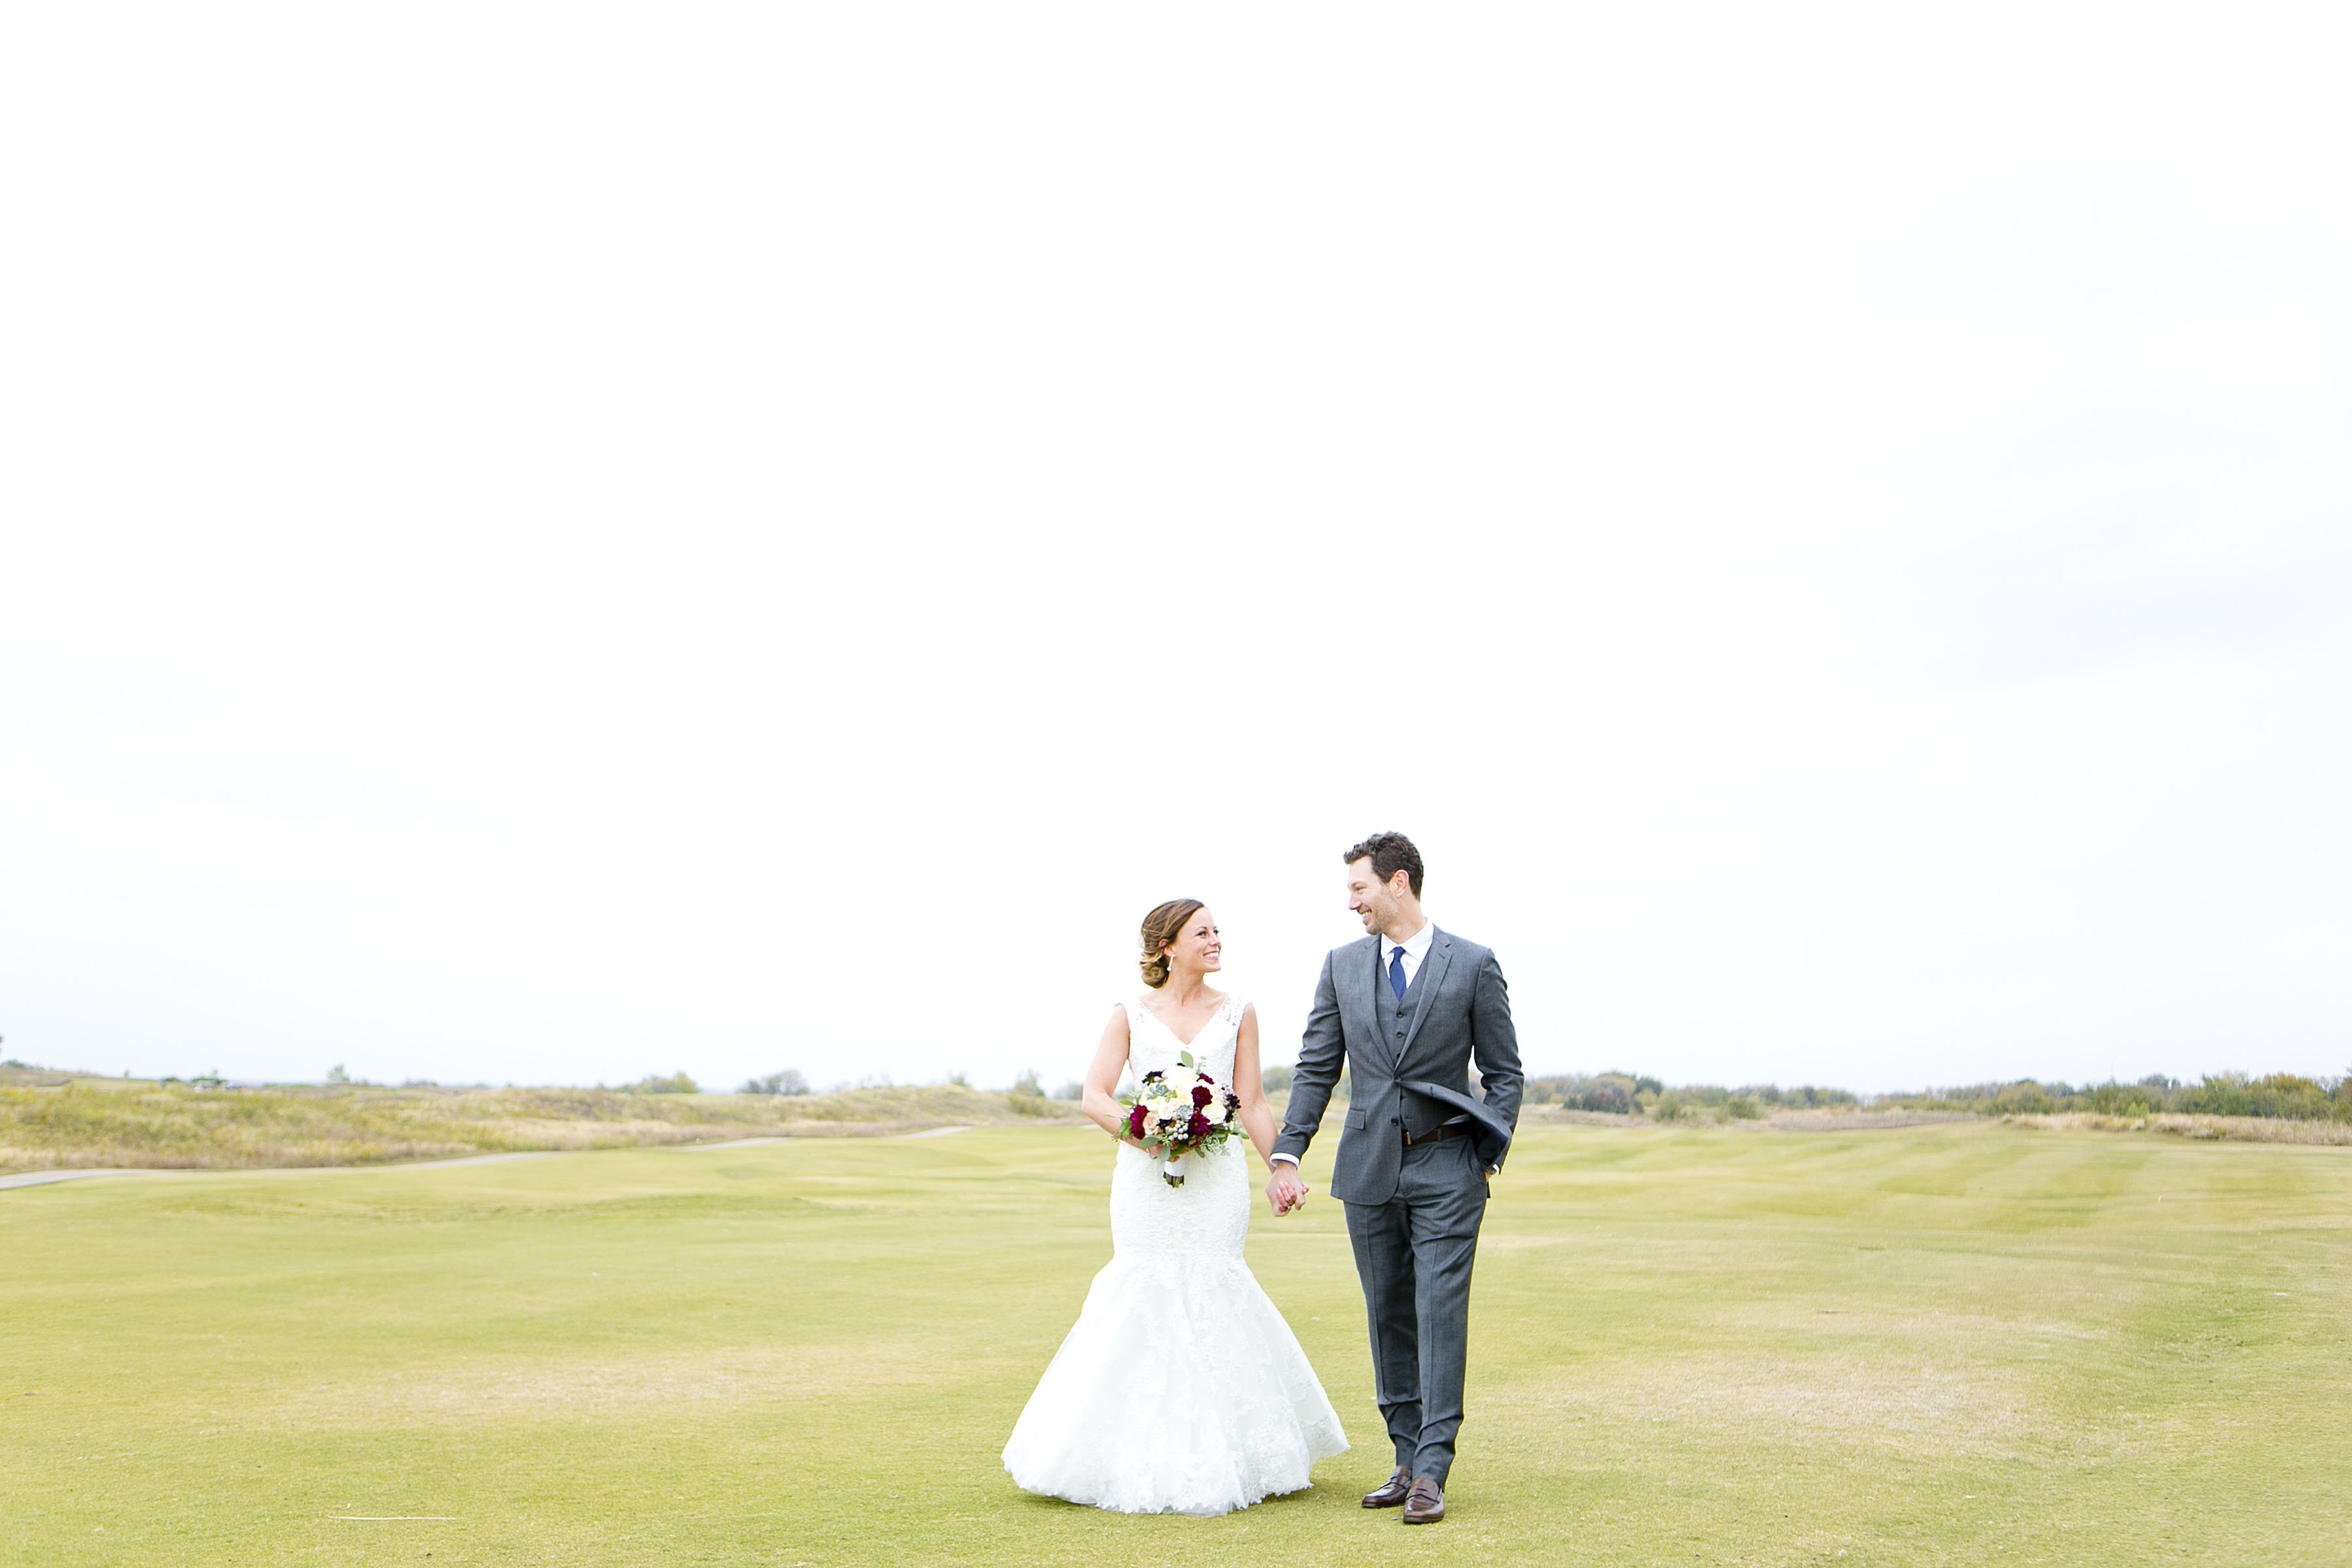 View More: http://maryfieldsphotography.pass.us/pace-wedding-11-15-14